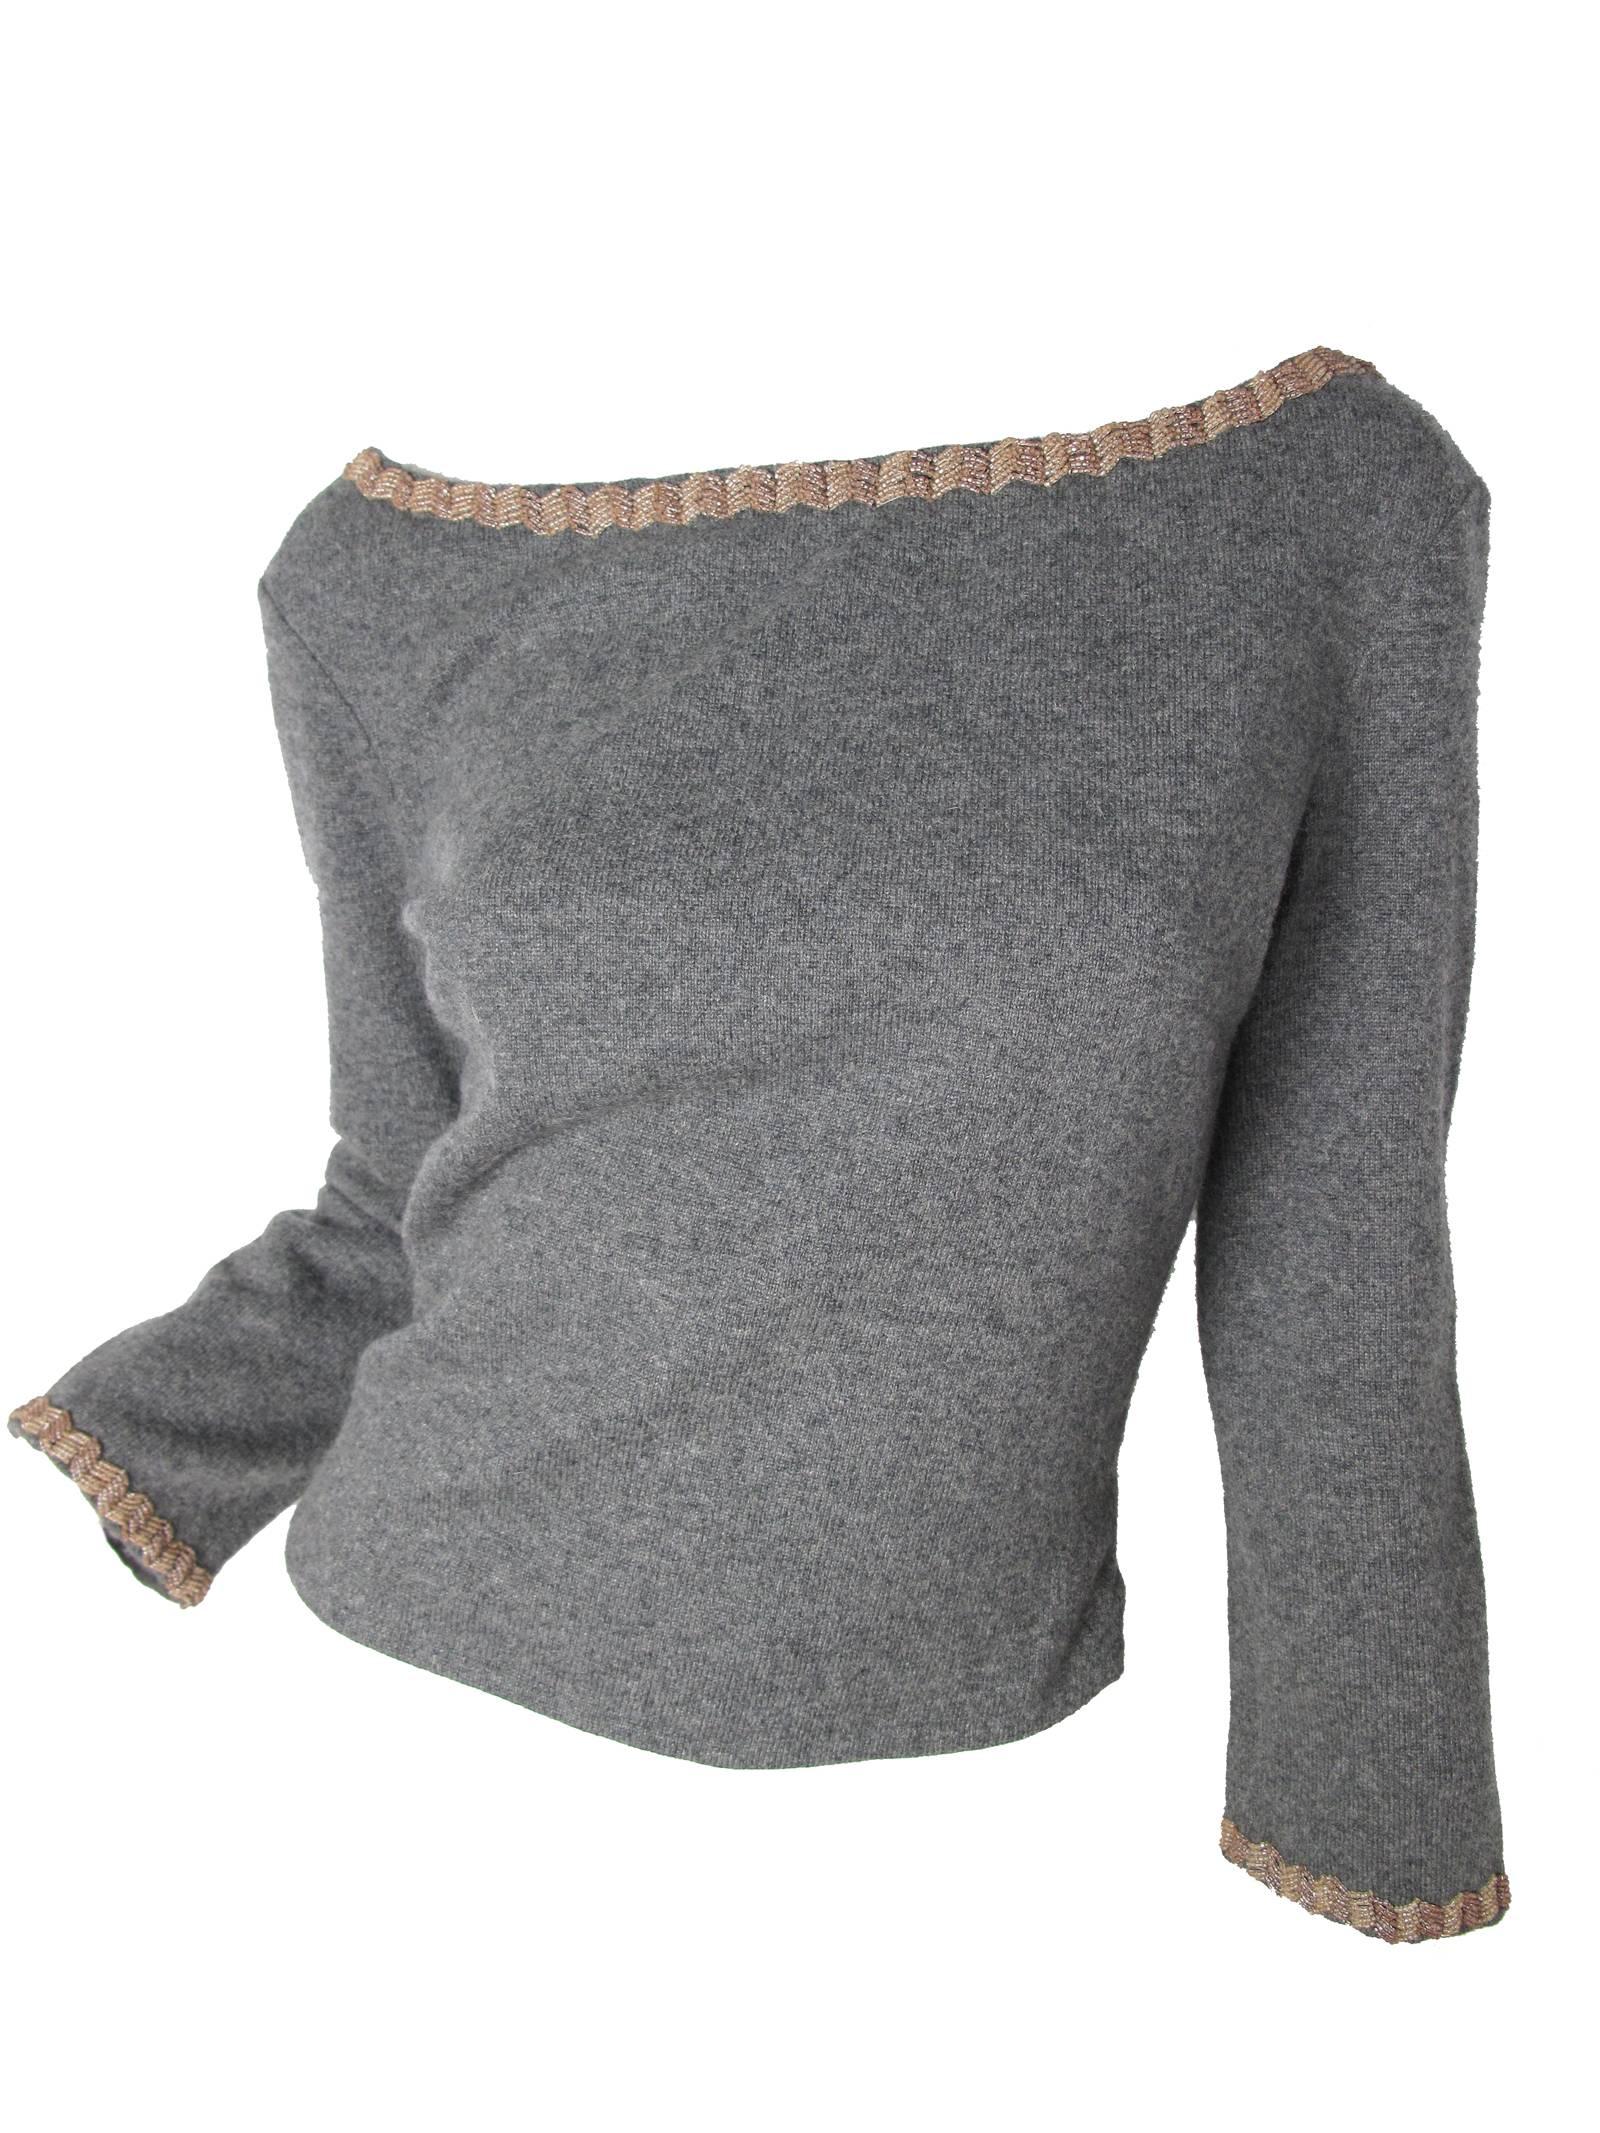 Richard Tyler Couture grey cashmere sweater with beading.  V neck at back . Condition: Excellent. Size L but fits current Med / Large. 

We accept returns for refund, please see our terms.  We offer free ground shipping within the US.  Please let